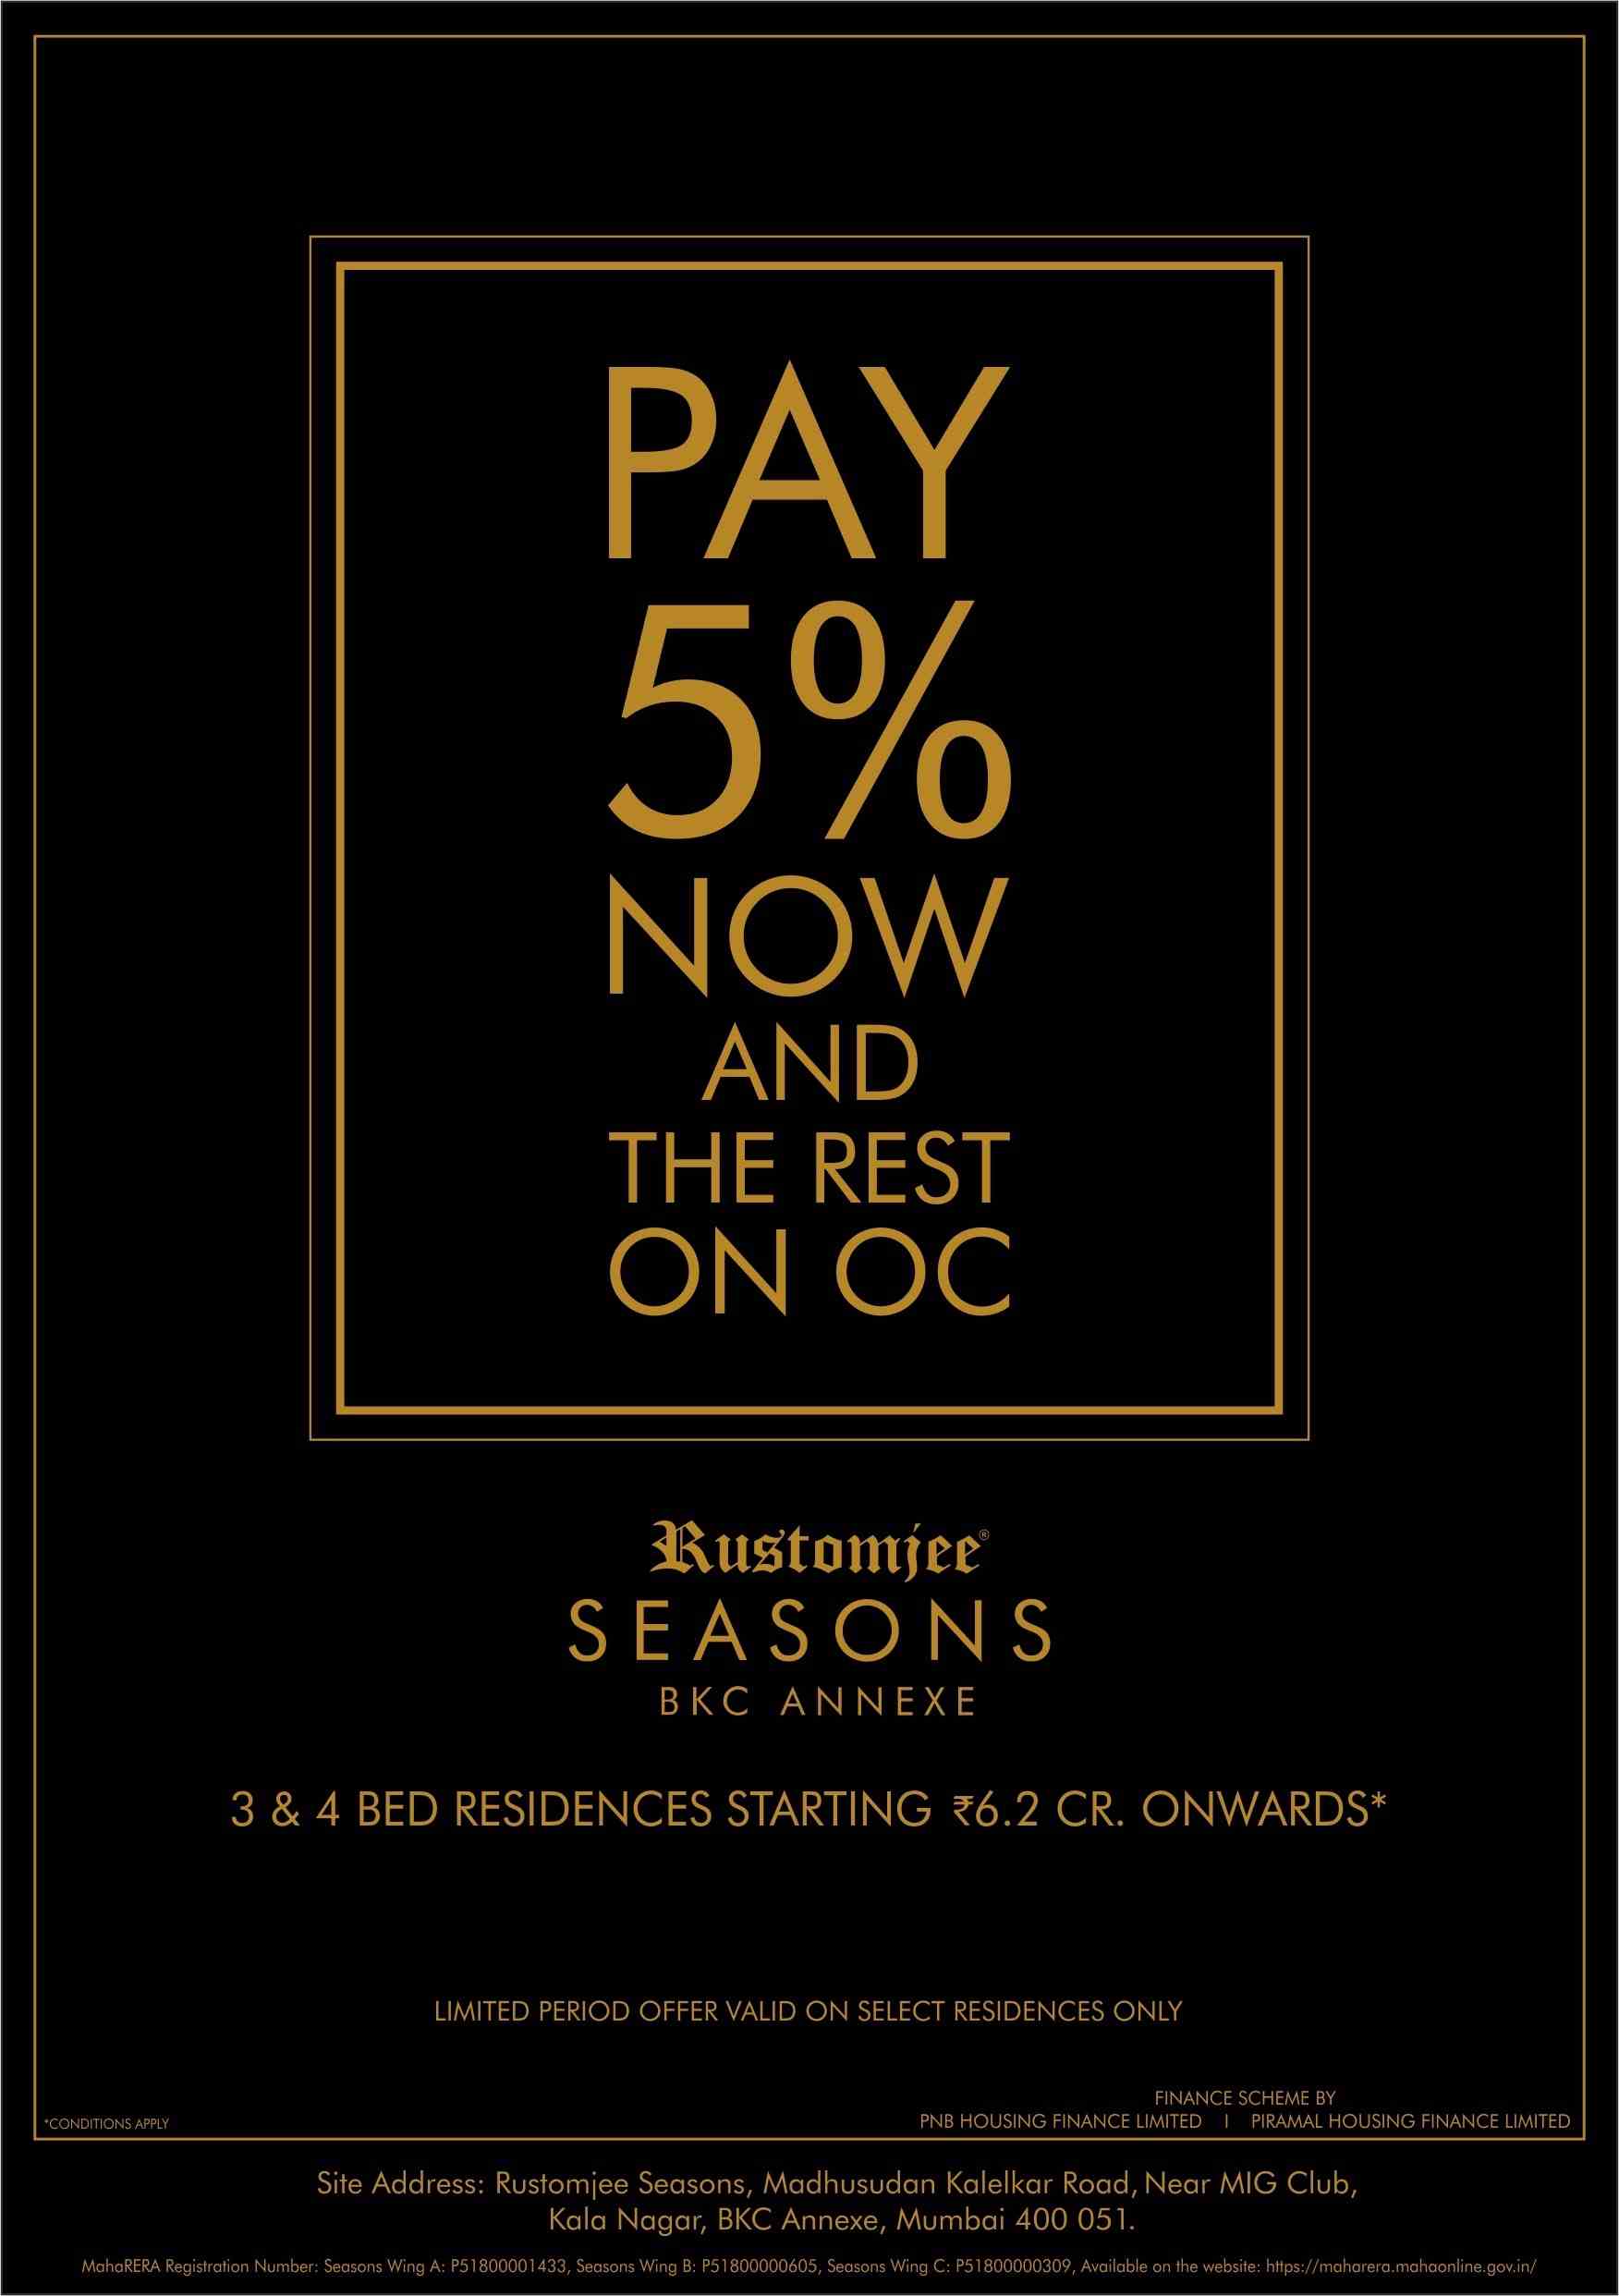 Pay 5% now and the rest on OC at Rustomjee Seasons in Mumbai